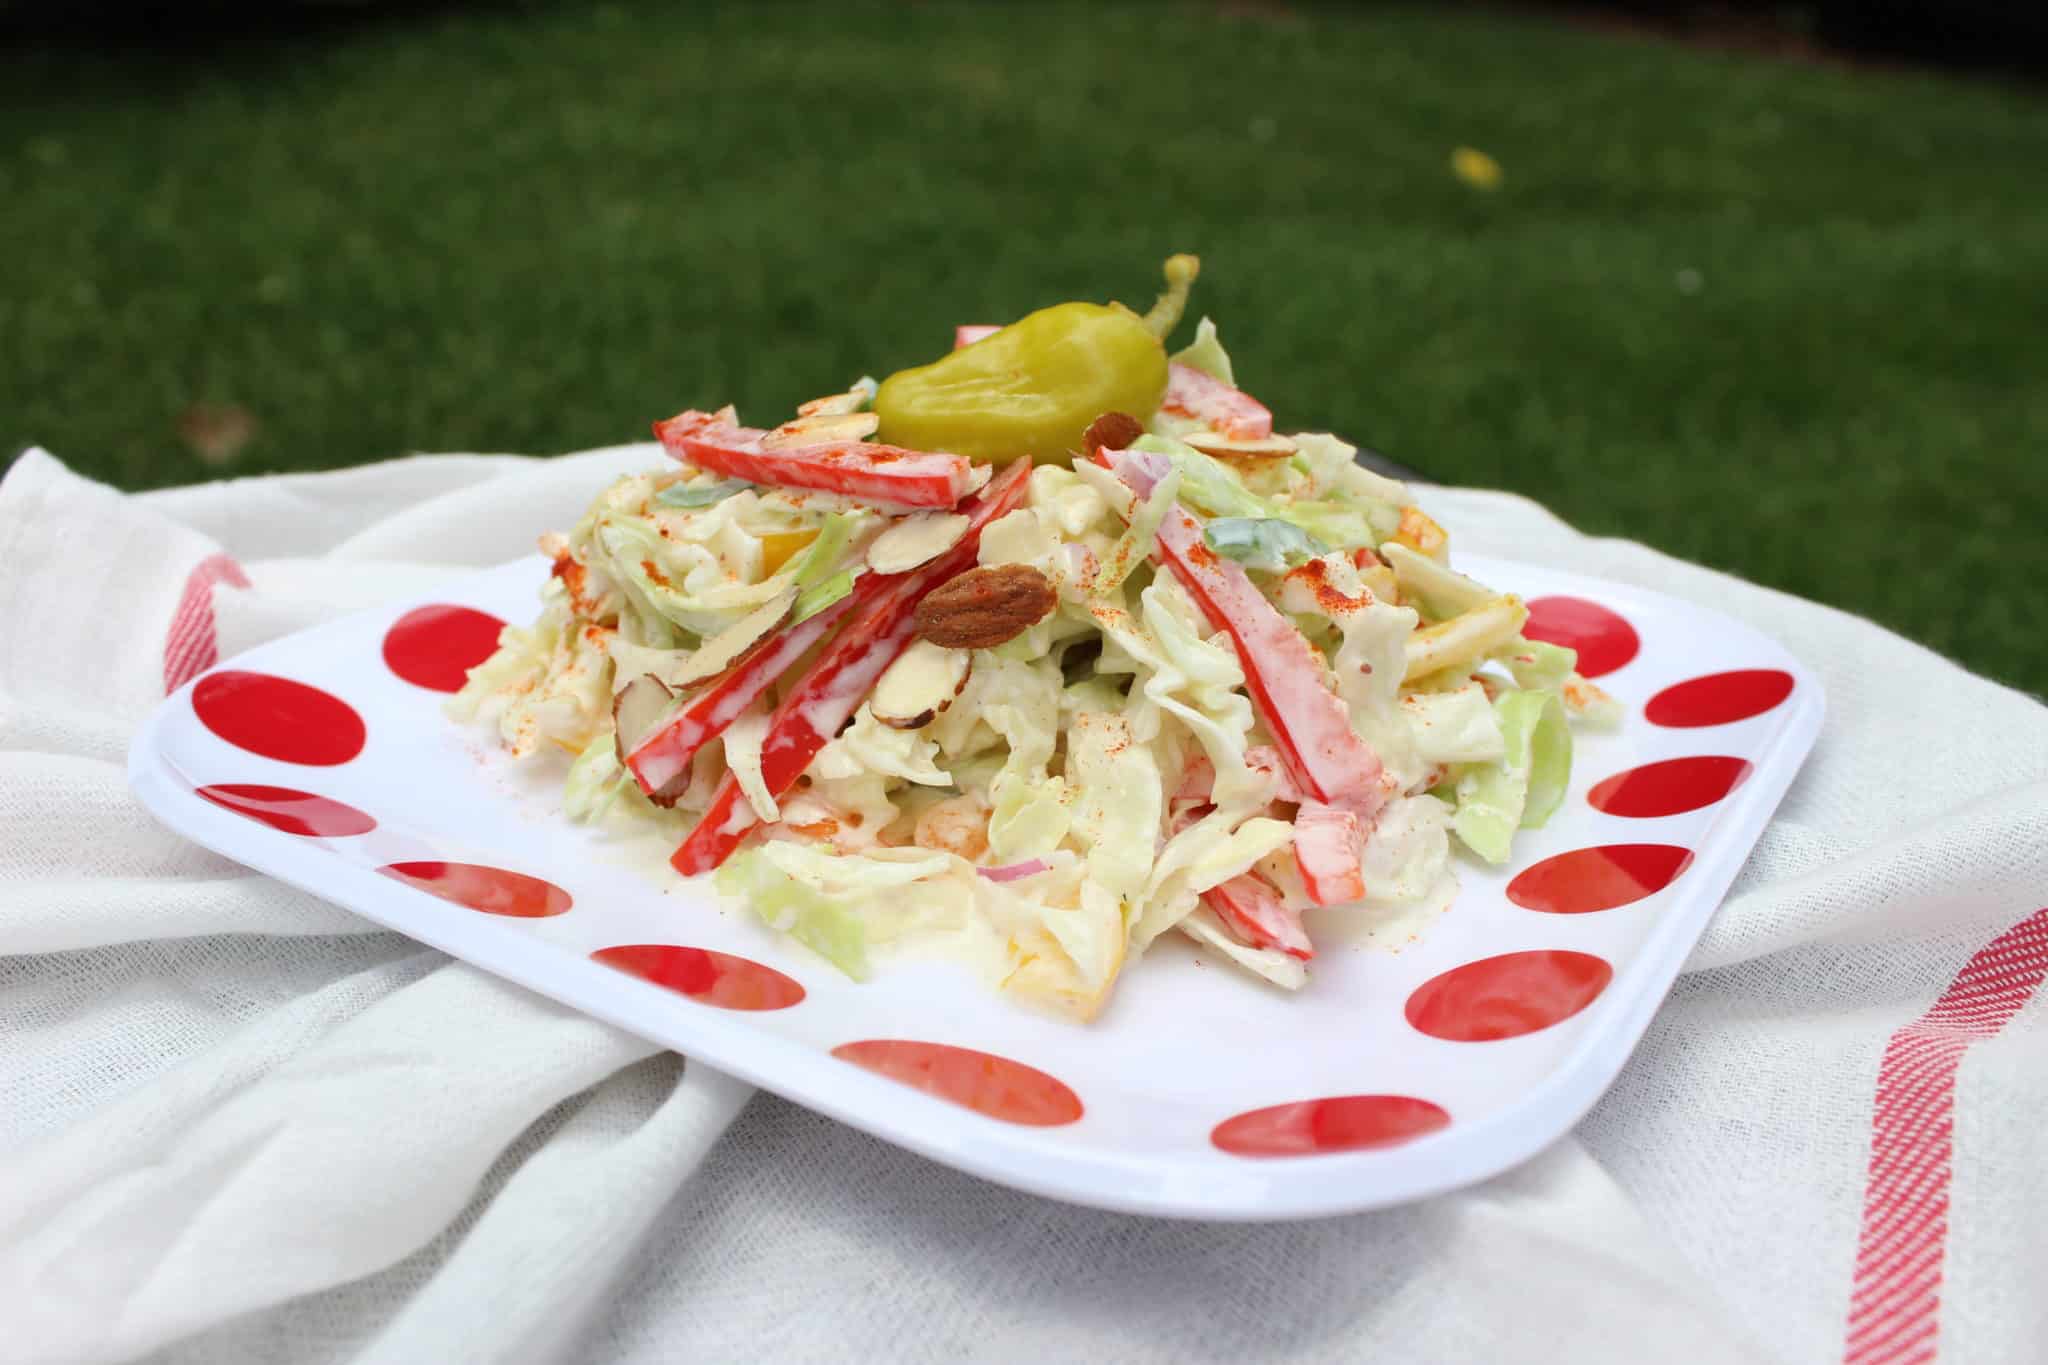 Make this simple, tasty pepper slaw recipe as a low-calorie side dish with a little crunch and kick!